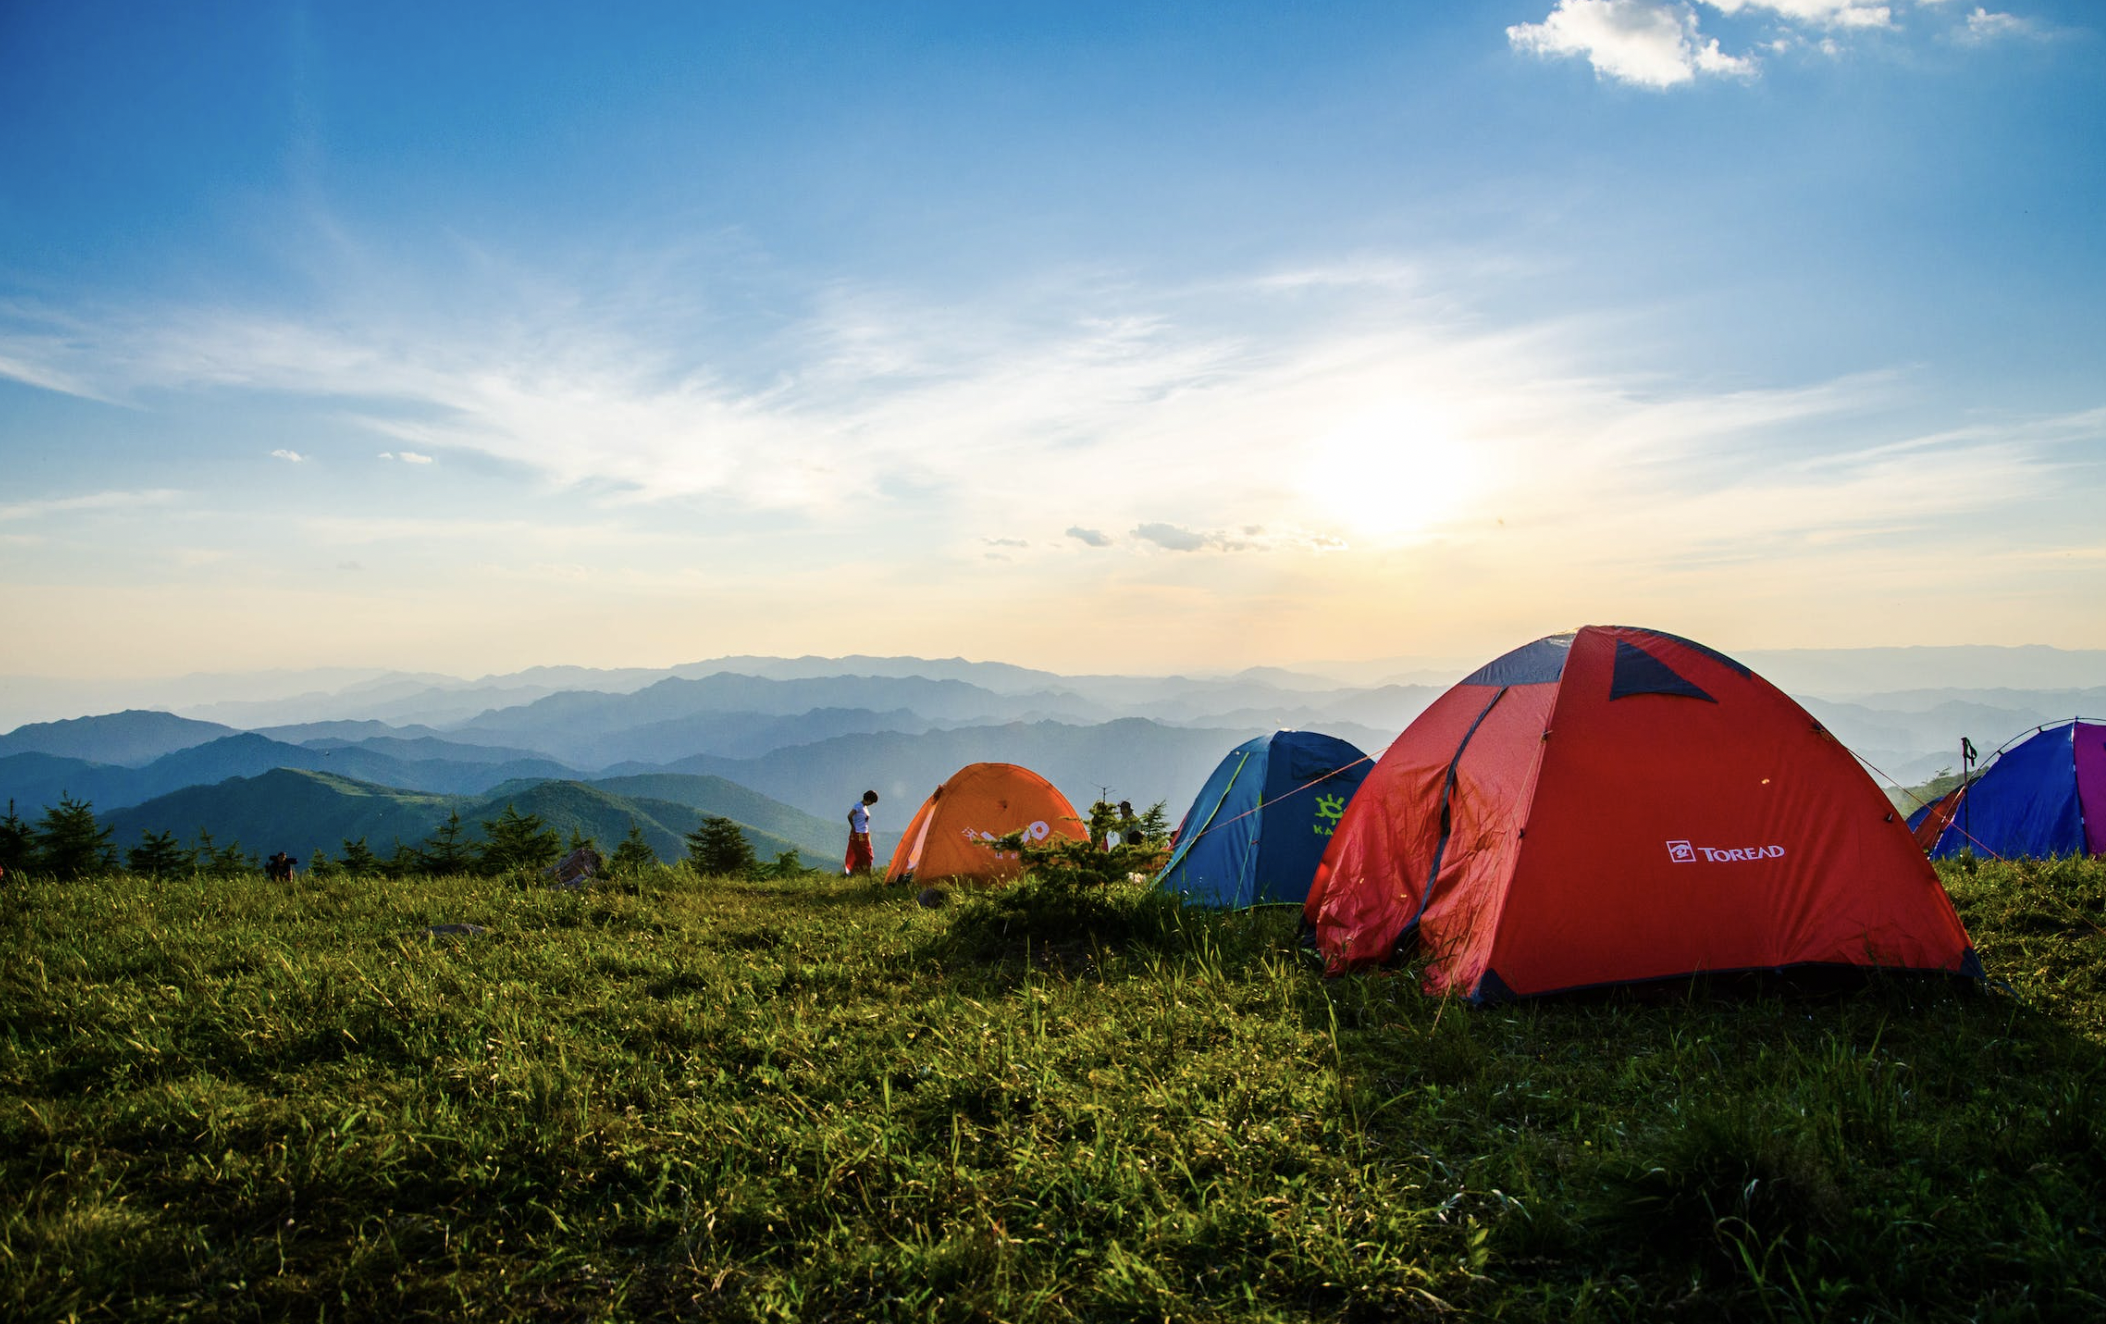 Top 7 Camping Tips For Kids in Ireland